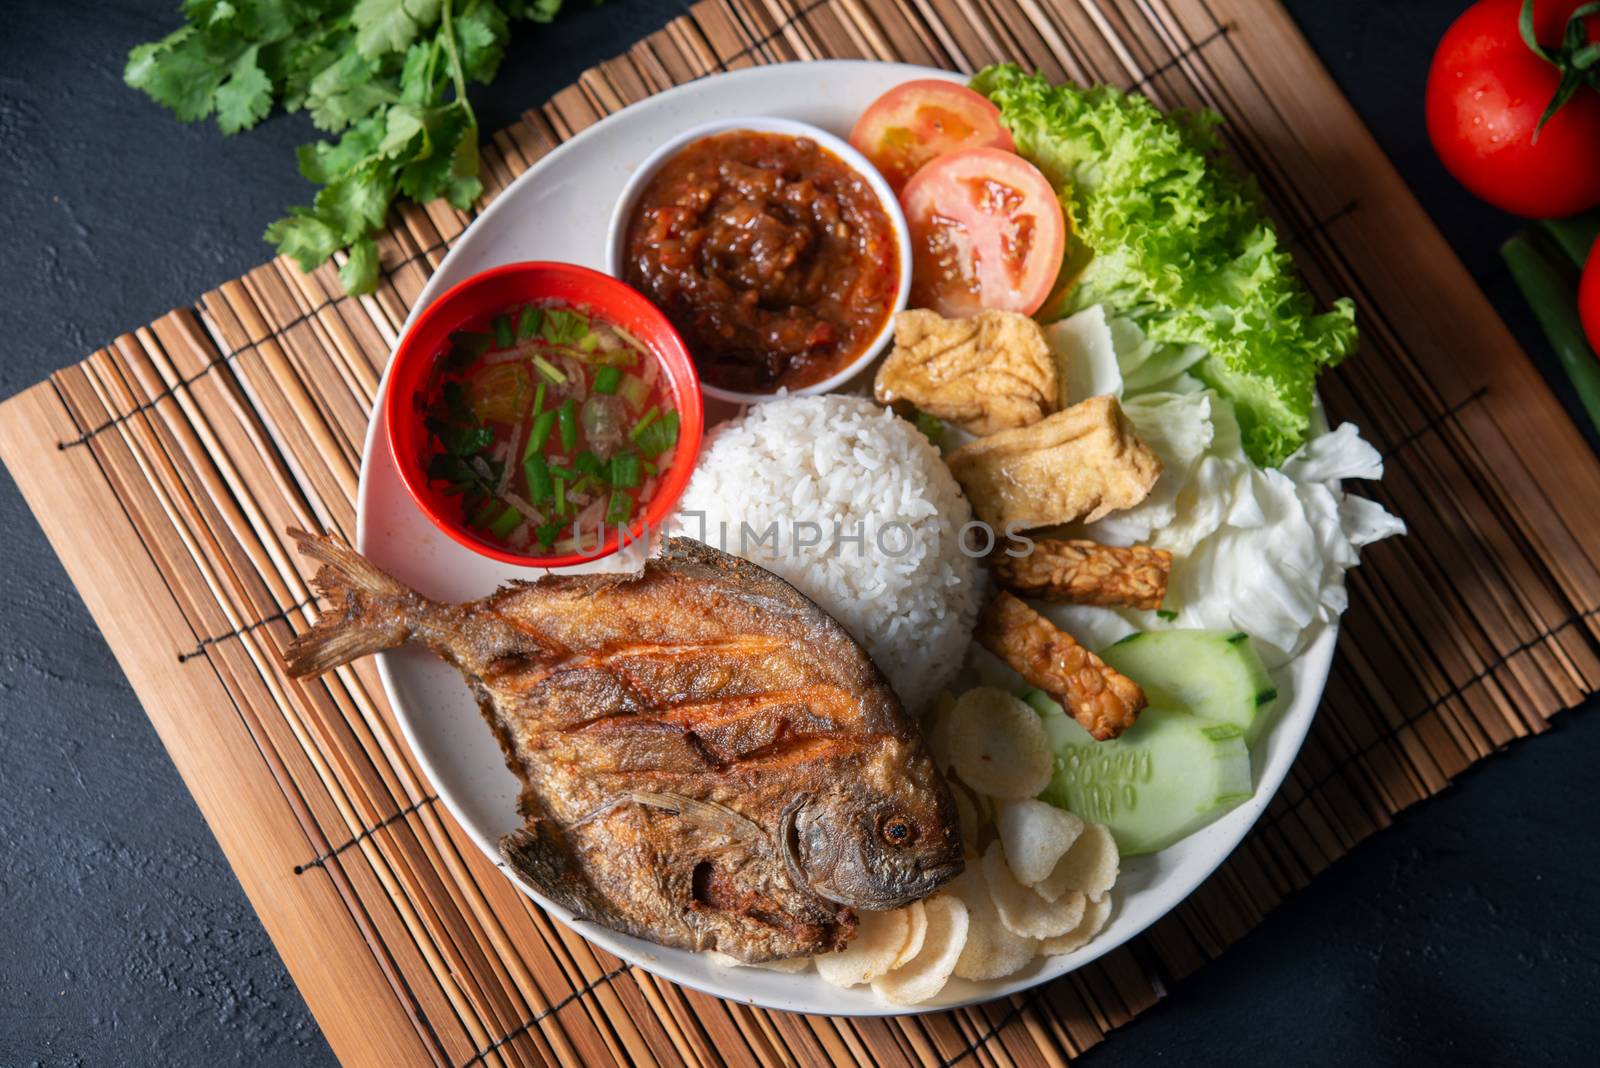 Fried pomfret fish and rice, popular traditional Malay or Indonesian local food. Flat lay top down overhead view.